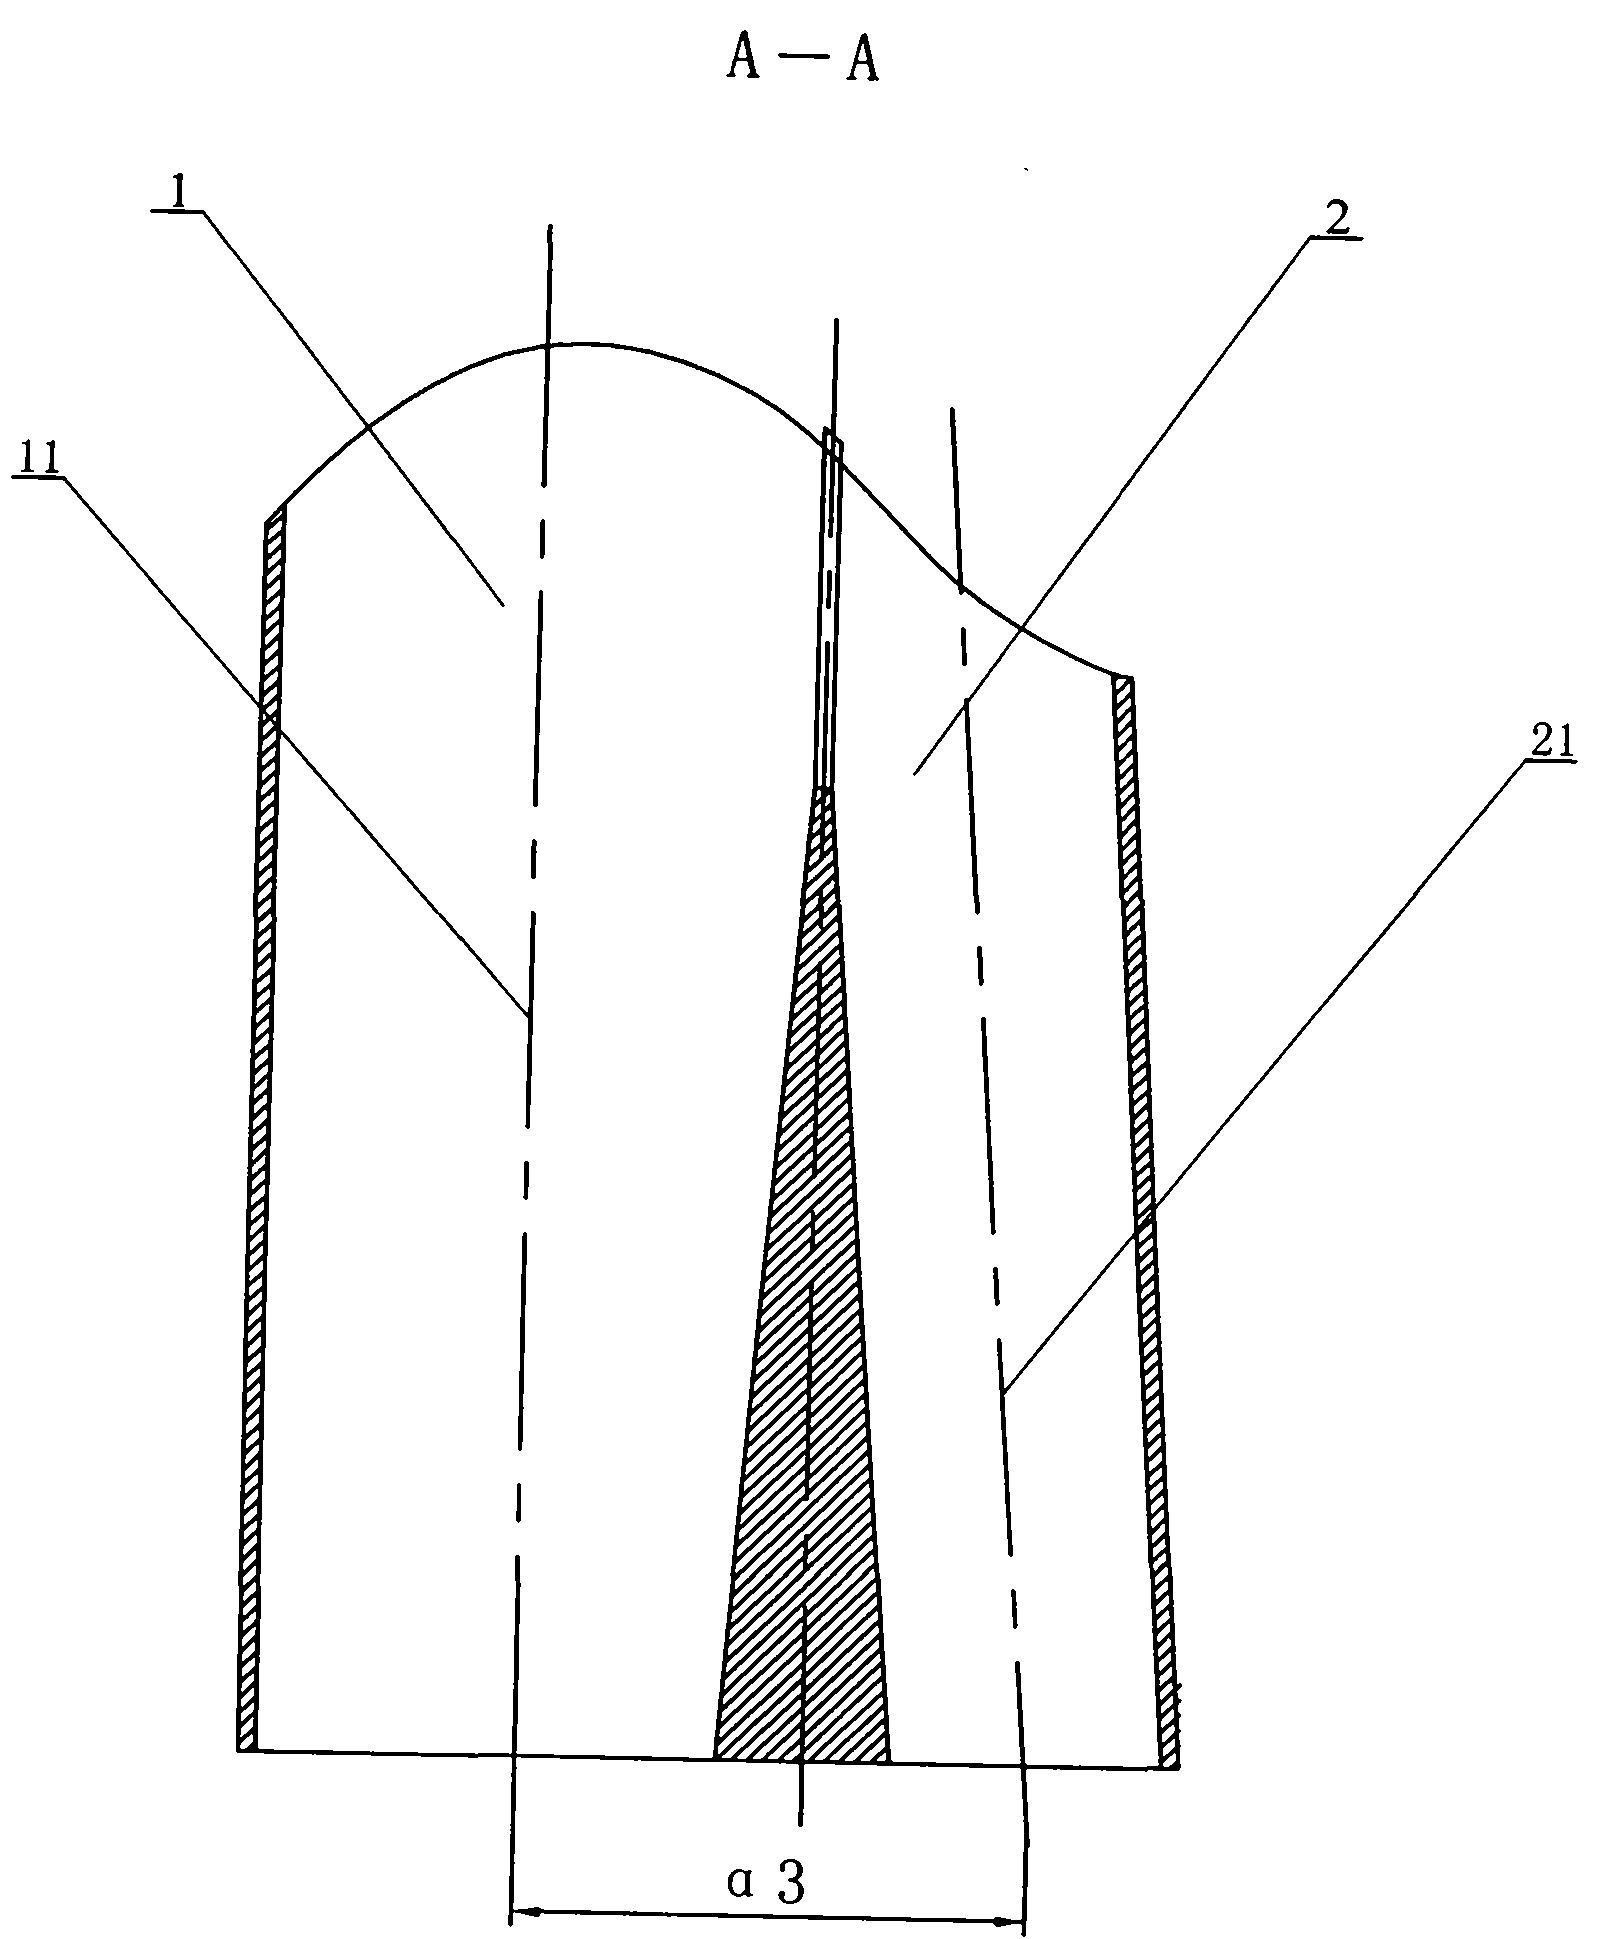 Wall-arranged direct-flow pulverized coal combustion device with side secondary air